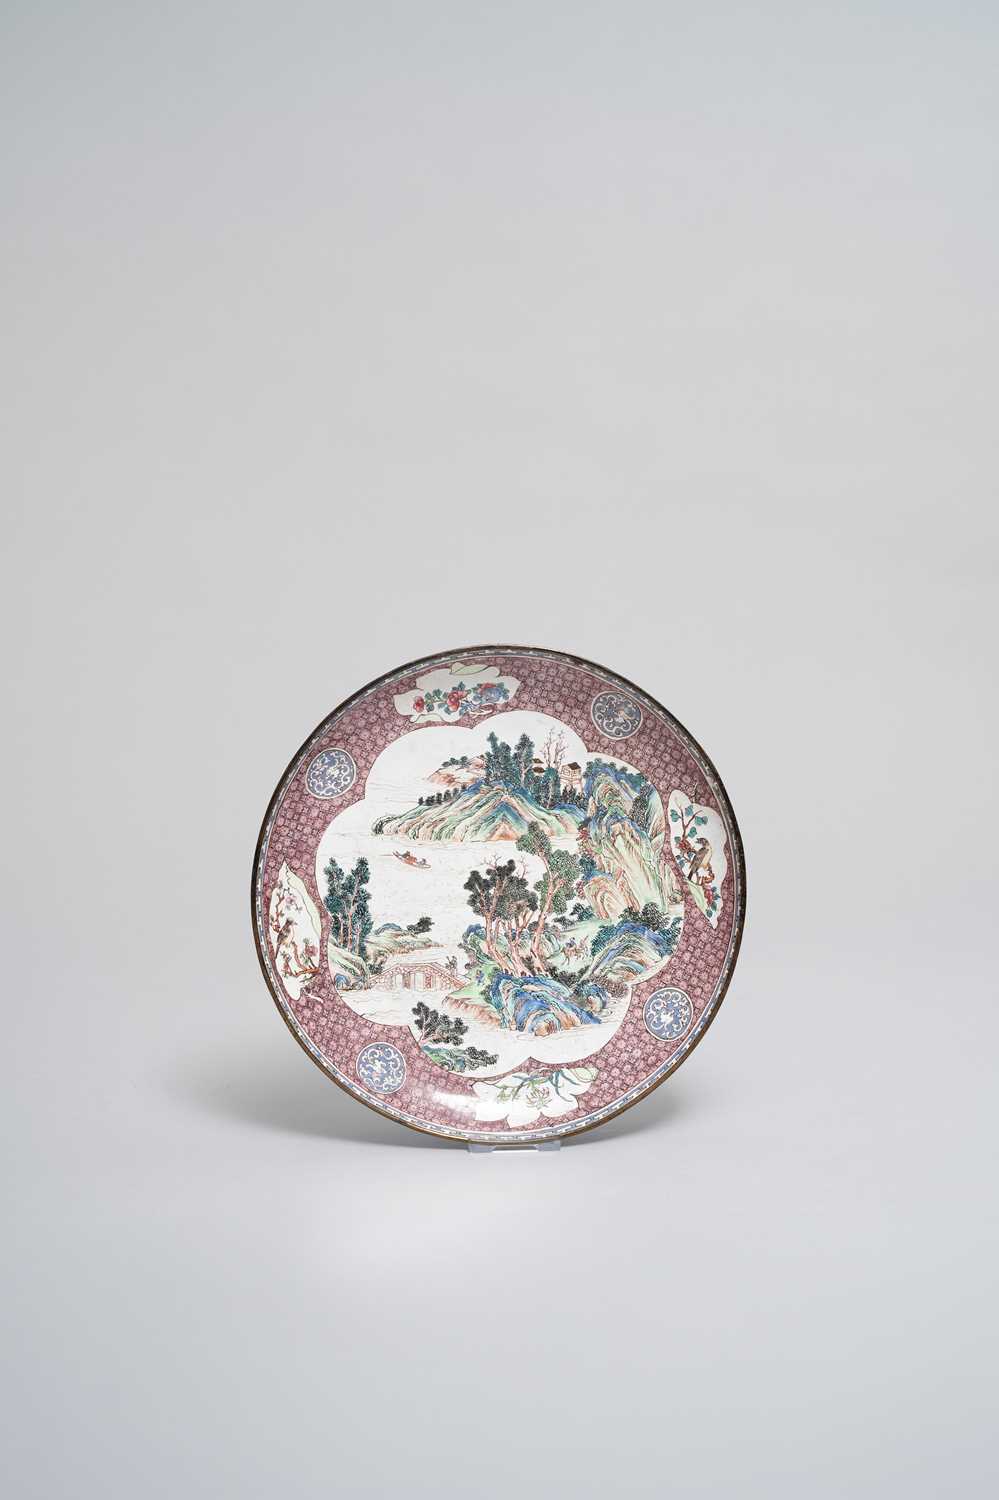 NO RESERVE A CHINESE FAMILLE ROSE PAINTED ENAMEL DISH 18TH CENTURY Decorated with a scene of figures